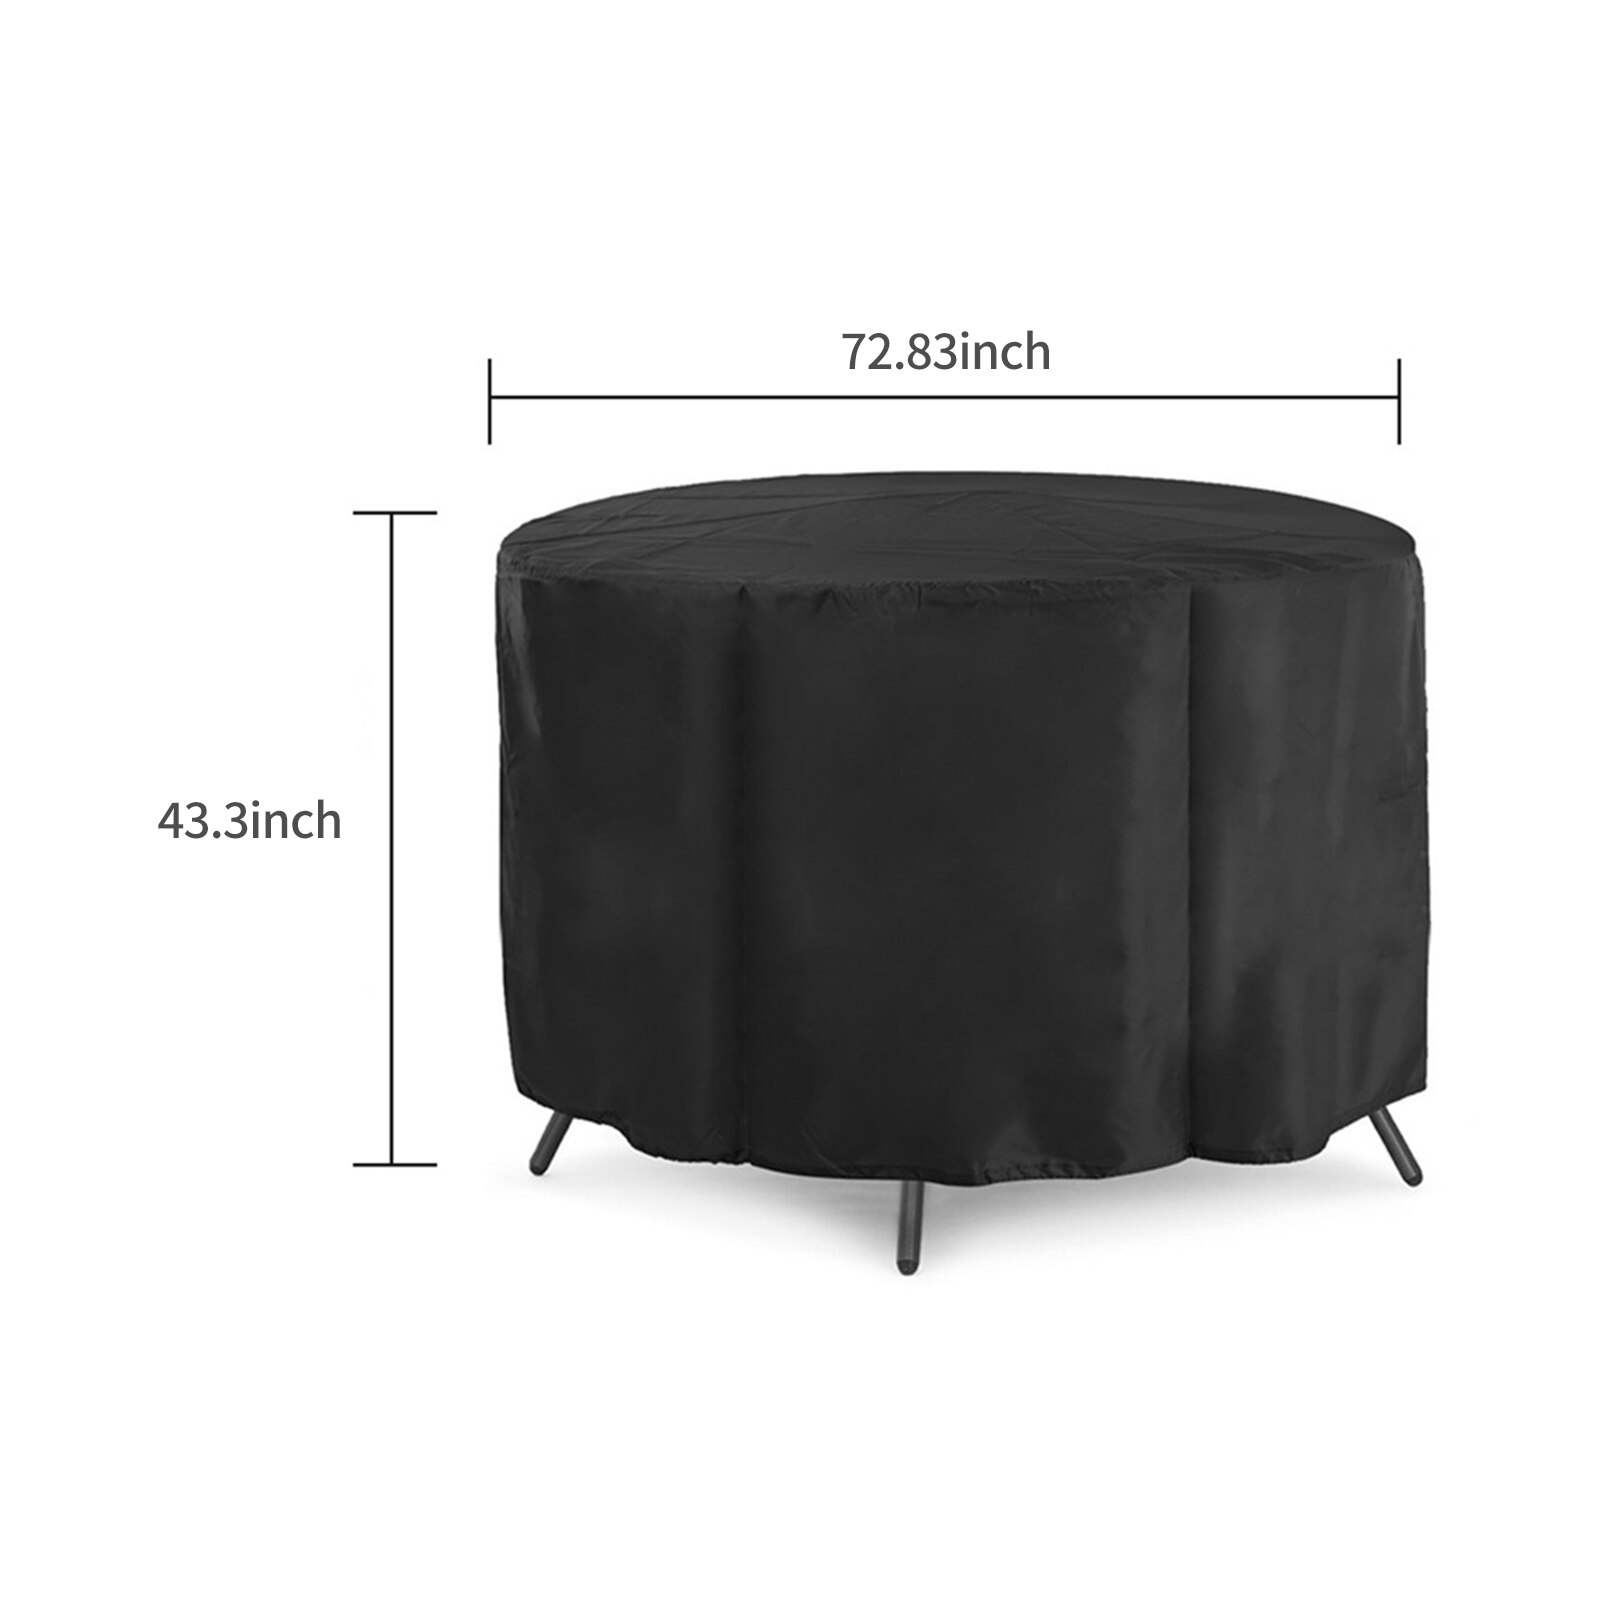 Outdoor Patio Furniture Covers Waterproof Table Chair Set Protect Covers Windproof Tear-Resistant UV Garden Furniture Cover: 120x75cm